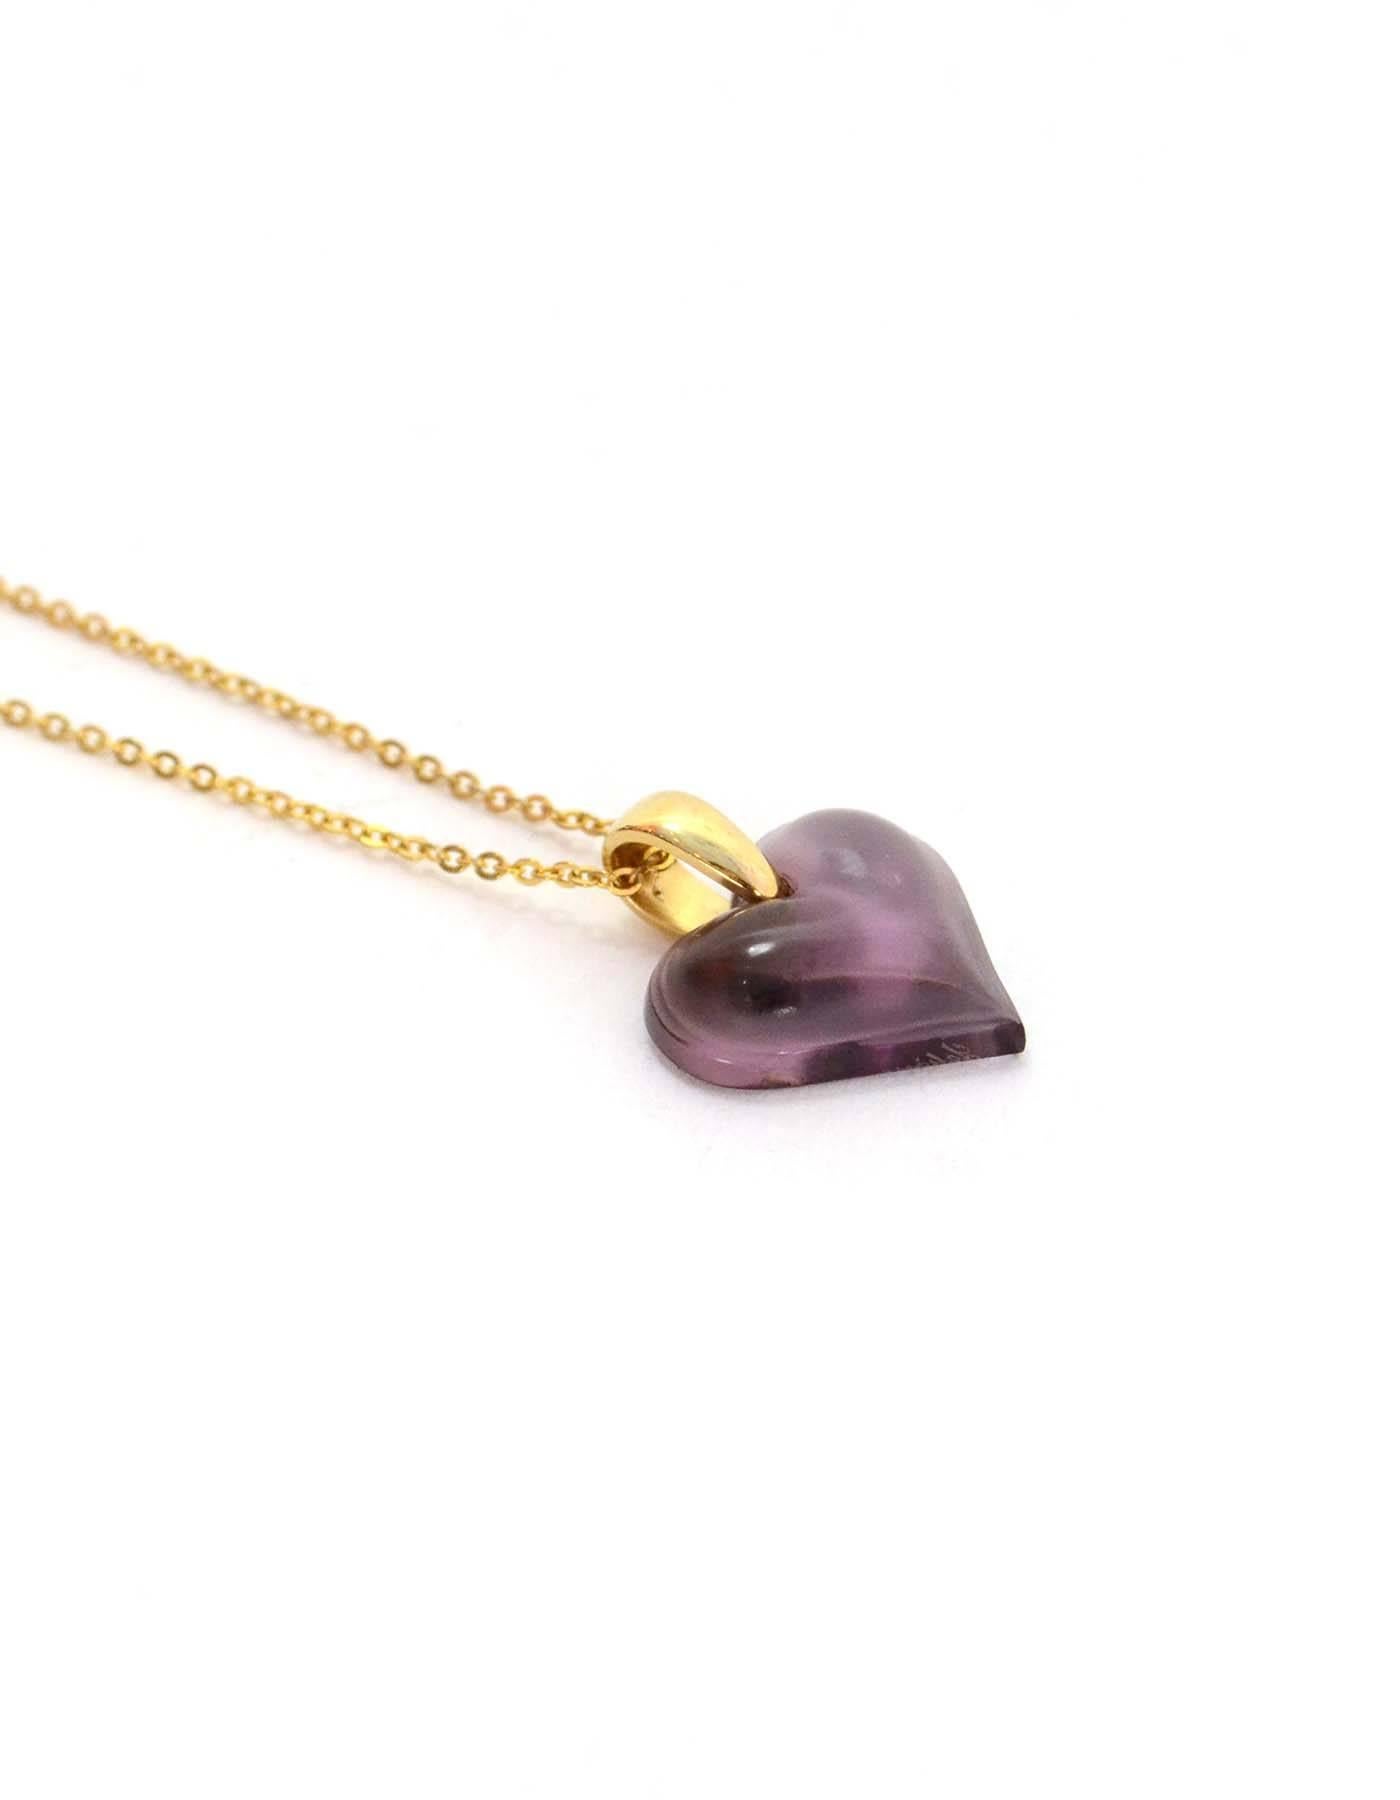 Lalique Purple Resin Heart Pendant Necklace 
Color: Goldtone and purple
Materials: Metal and resin
Closure: Jump ring closure
Stamp: Lalique
Overall Conditon: Excellent pre-owned condition
Measurements: 
Diameter: 8.75